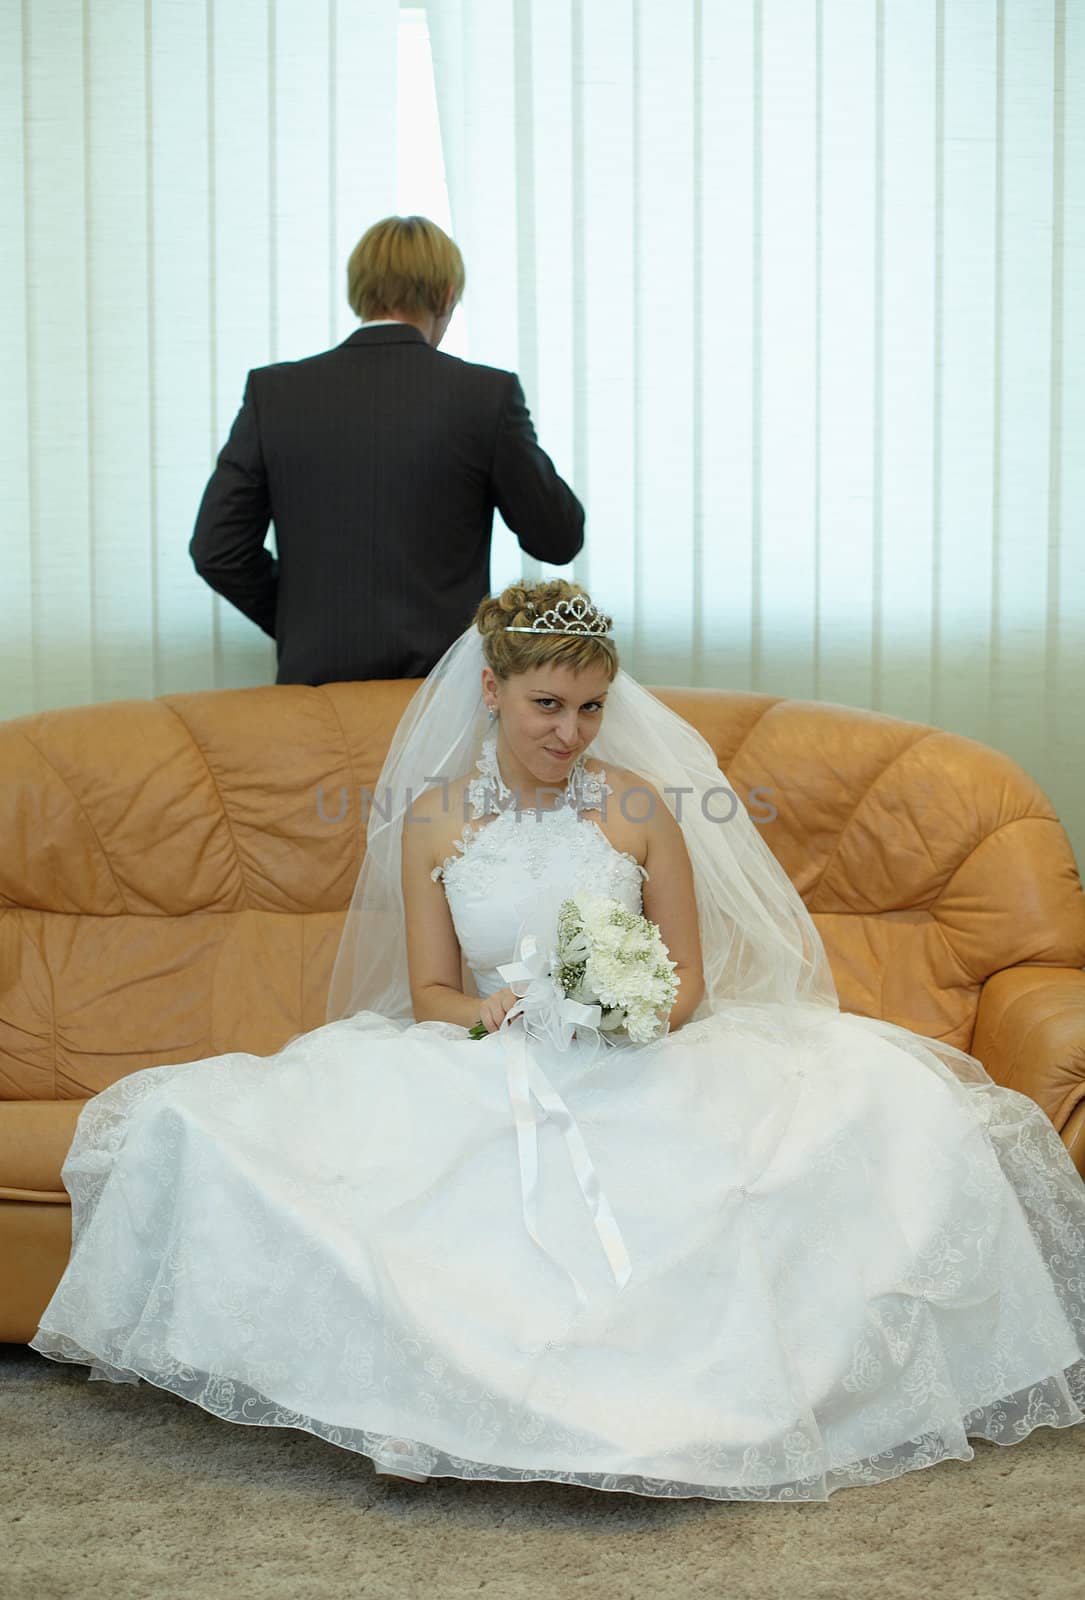 Bride sitting on couch, groom looks out window by pzaxe